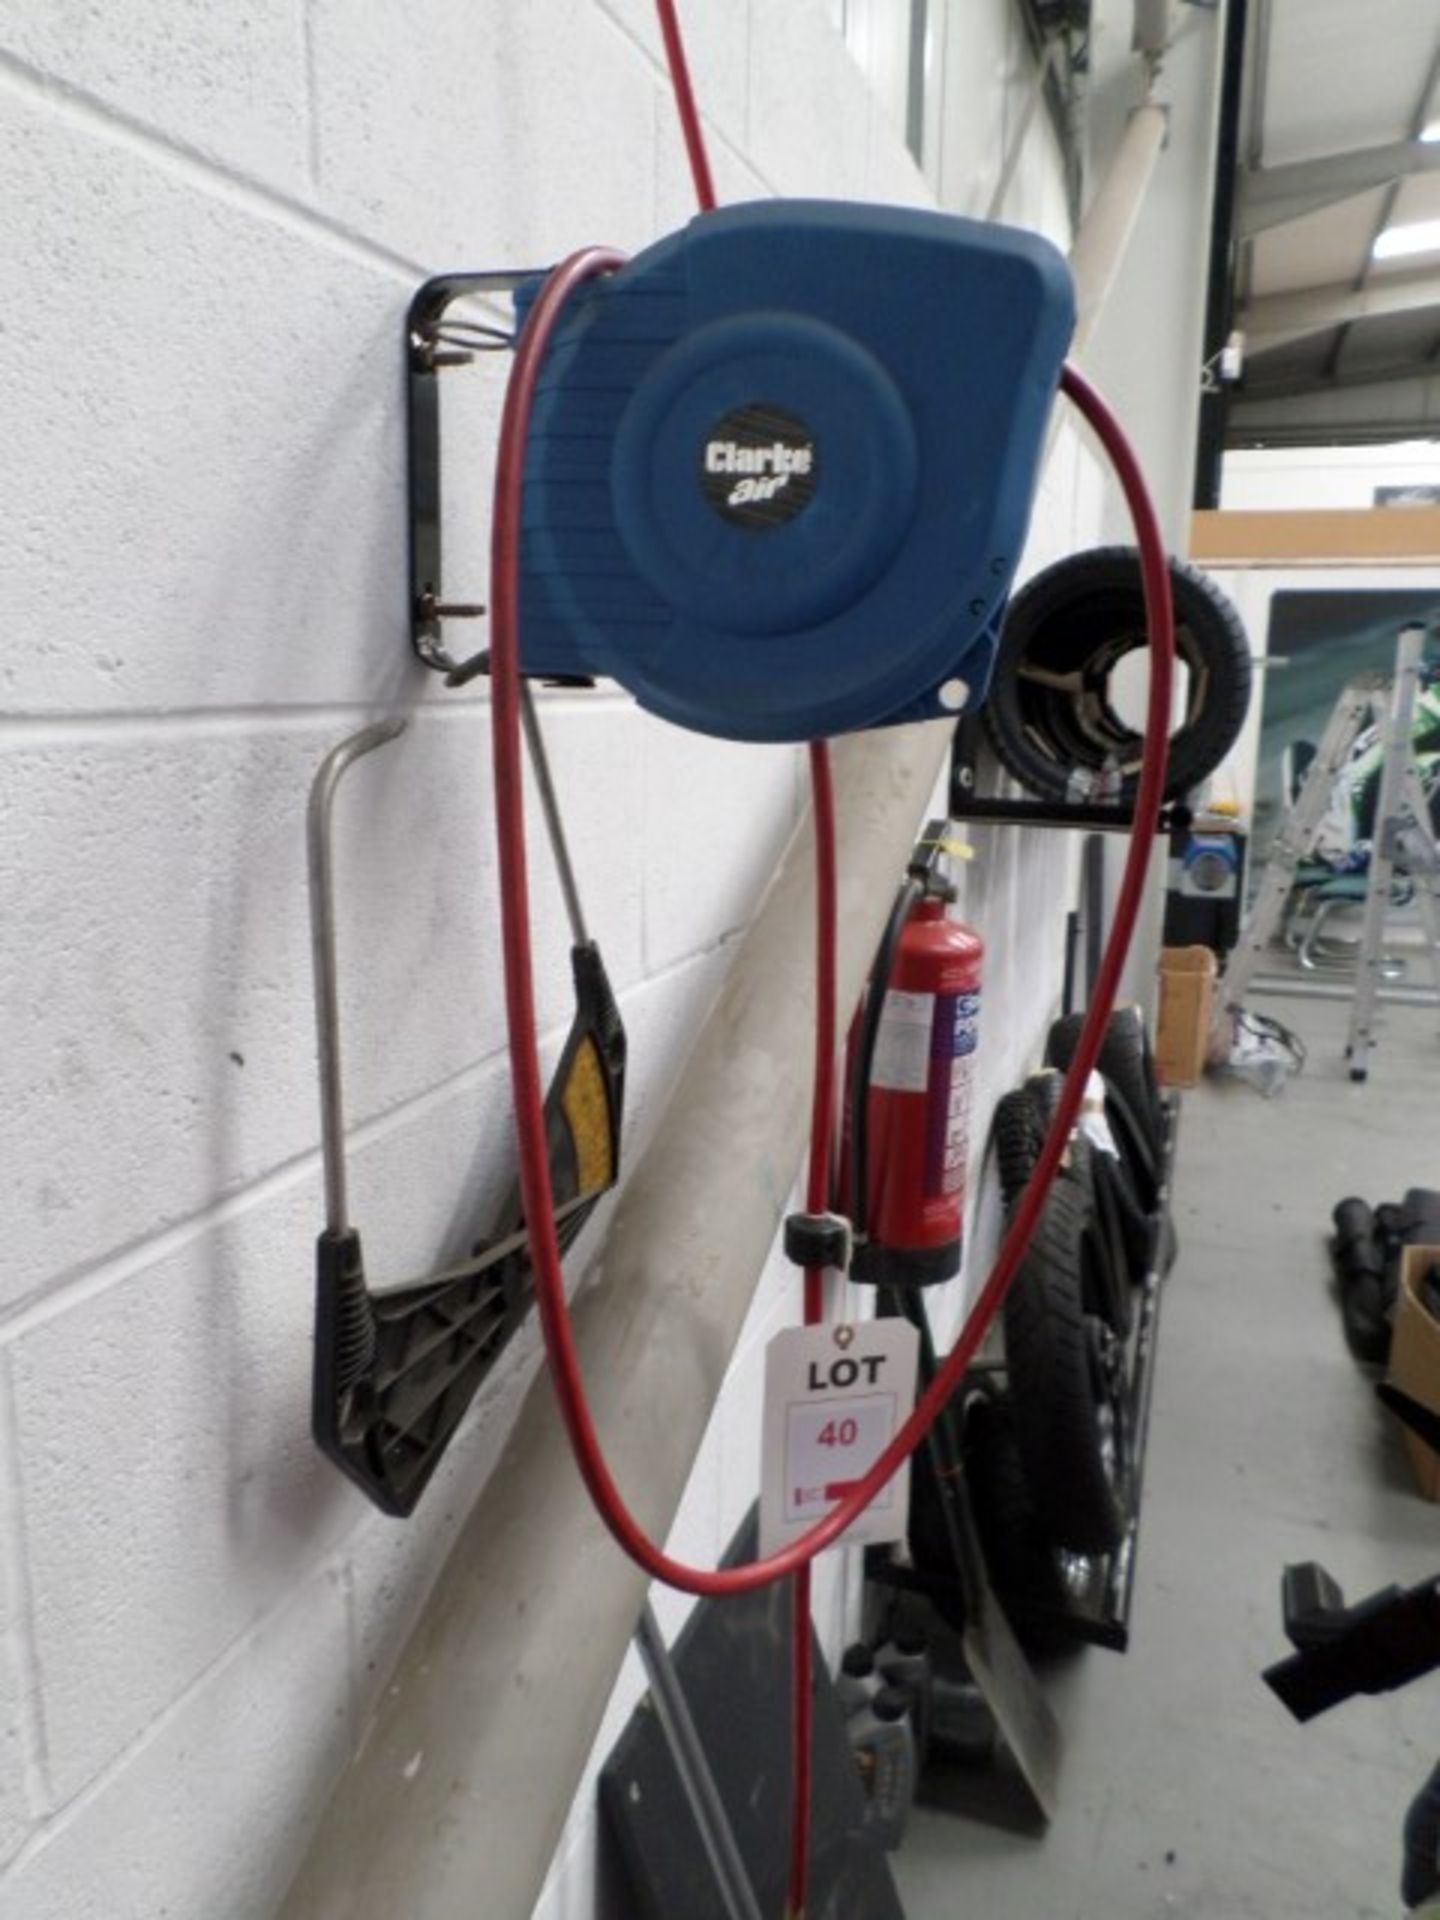 Clark air wall mounted retractable air hose (This lot does not have a current certificate of - Image 2 of 2